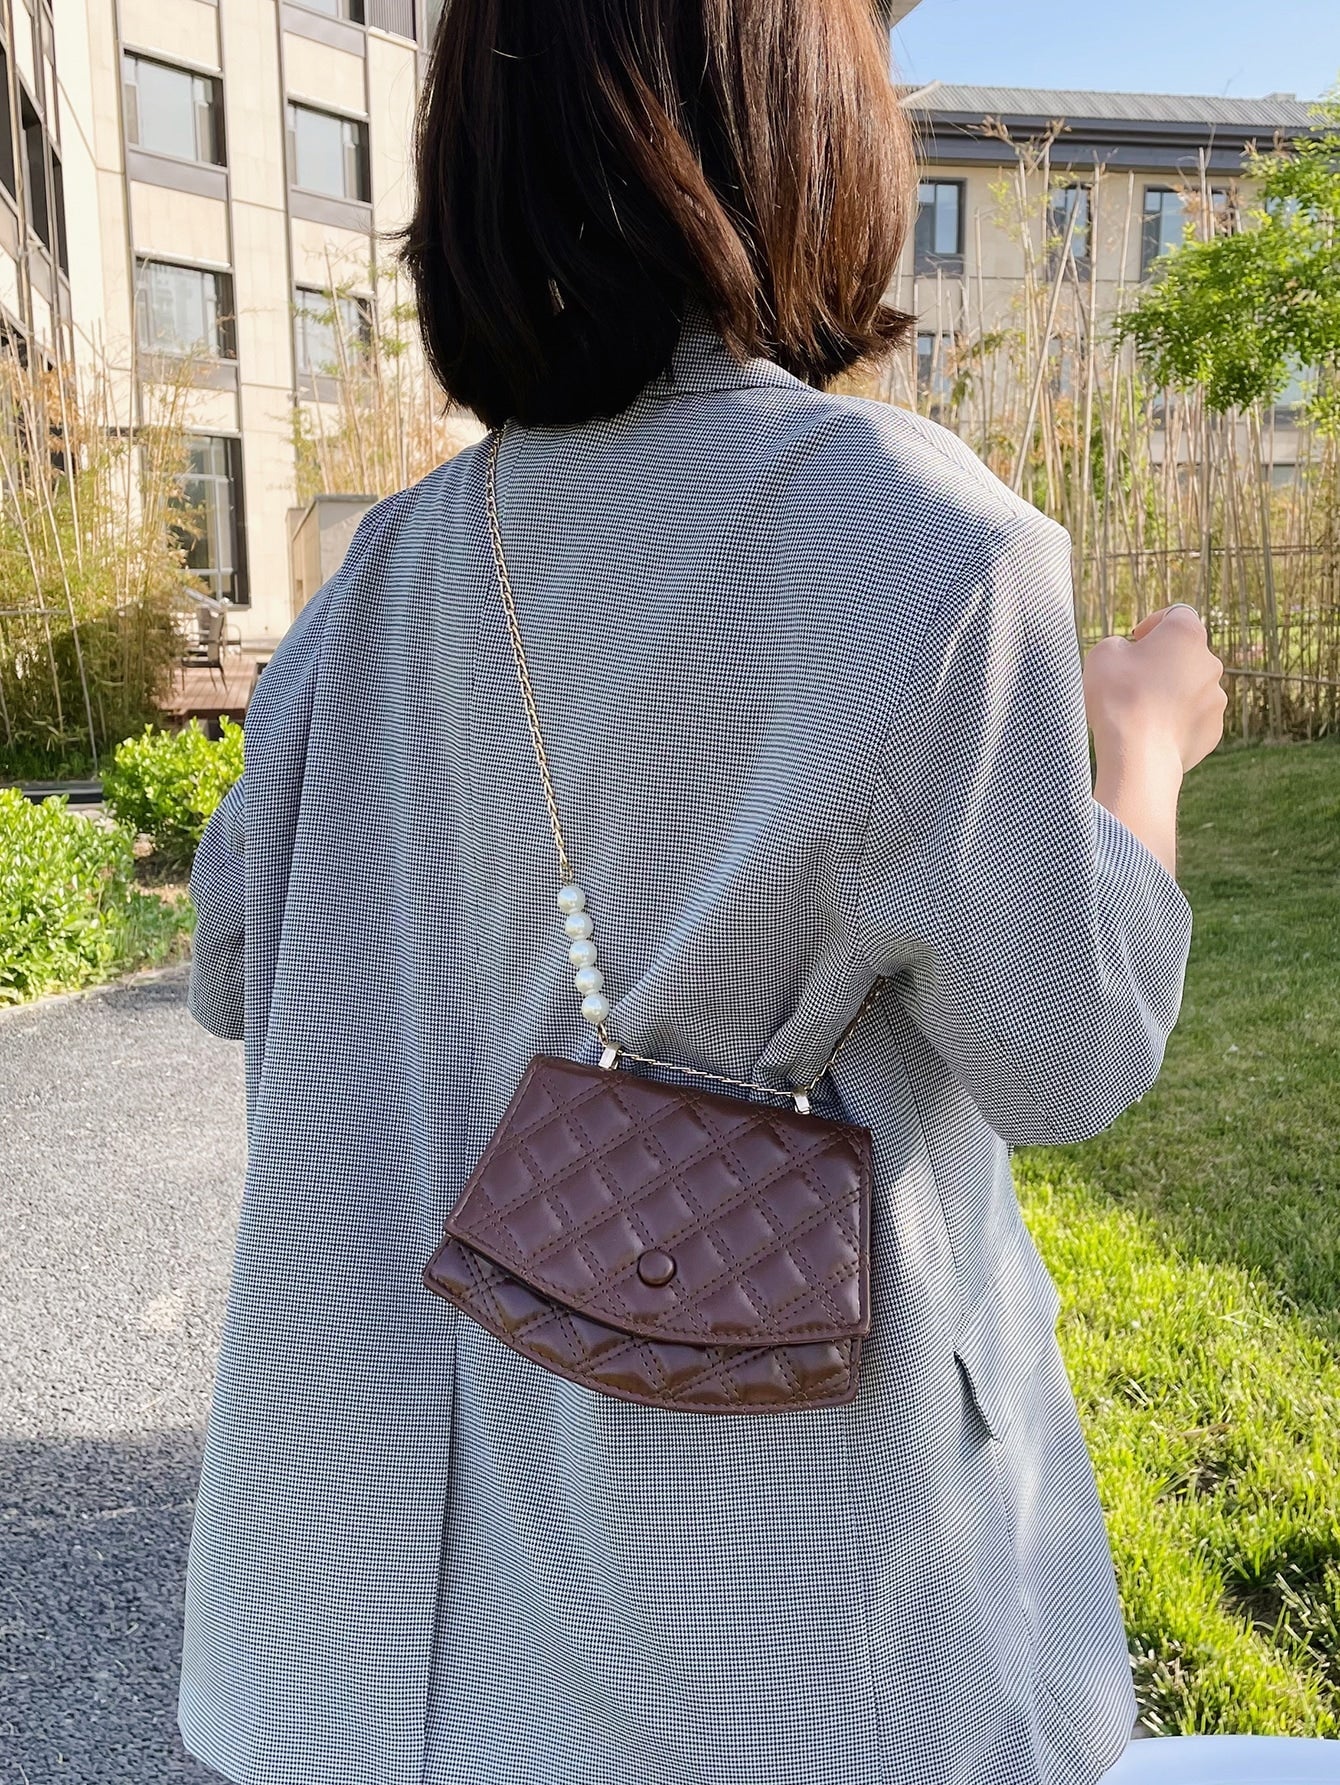 Quilted Chain Shoulder Bag